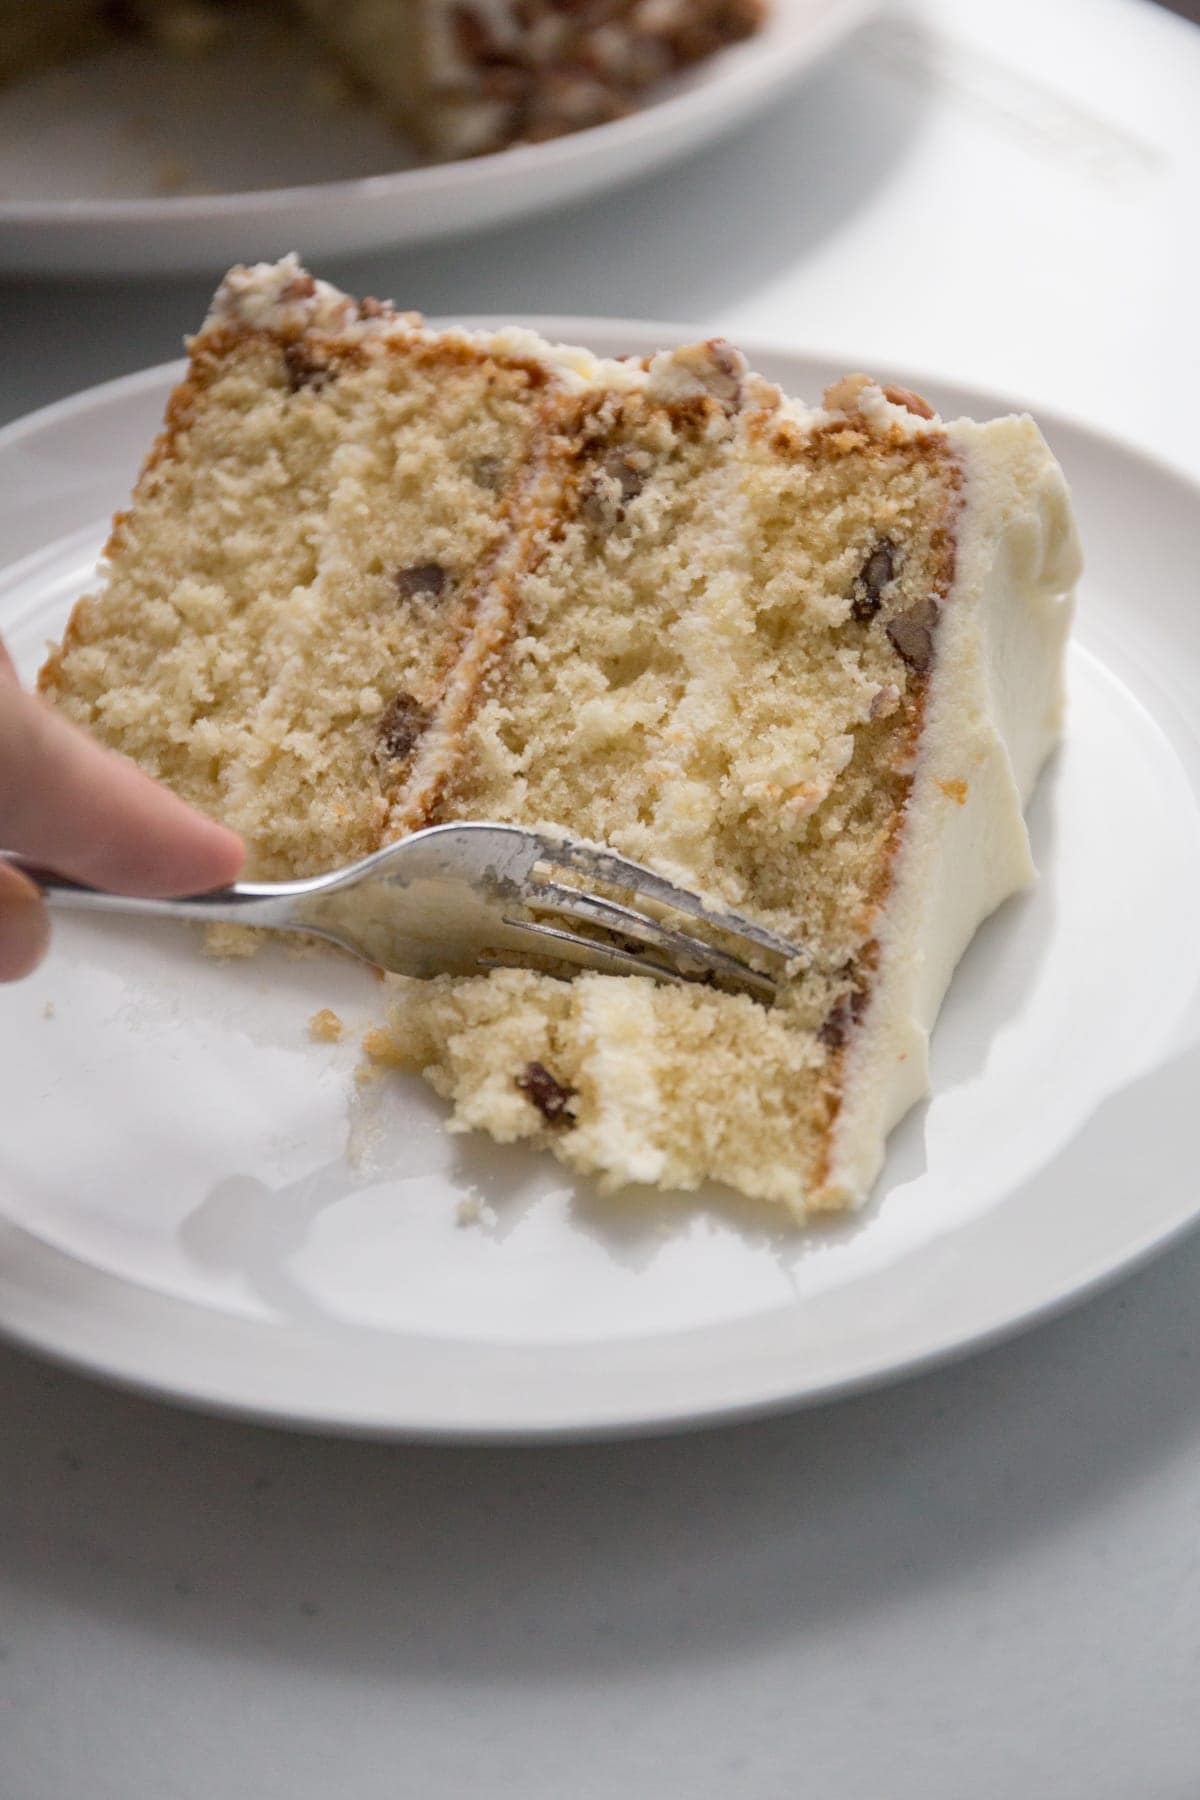 Cake slice on a plate with a fork taking a bite